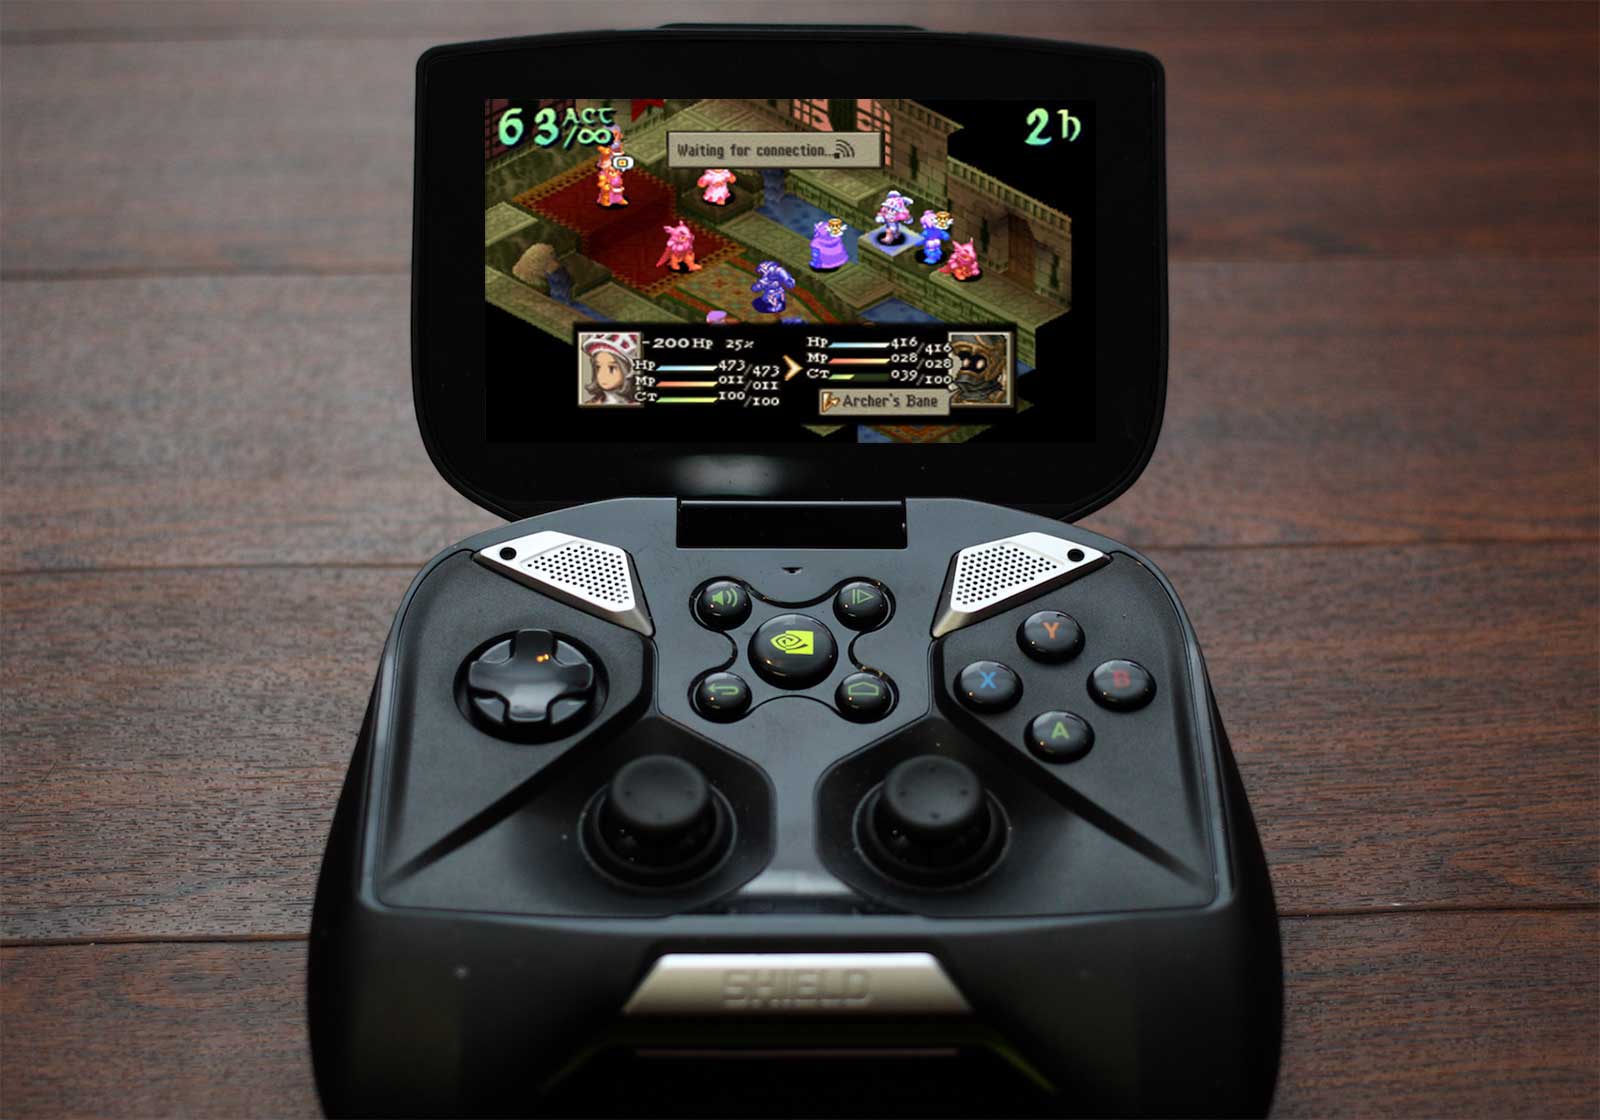 Groenland Symptomen Vlot PSP Emulation for PC and Android using PPSSPP - RetroGaming with Racketboy